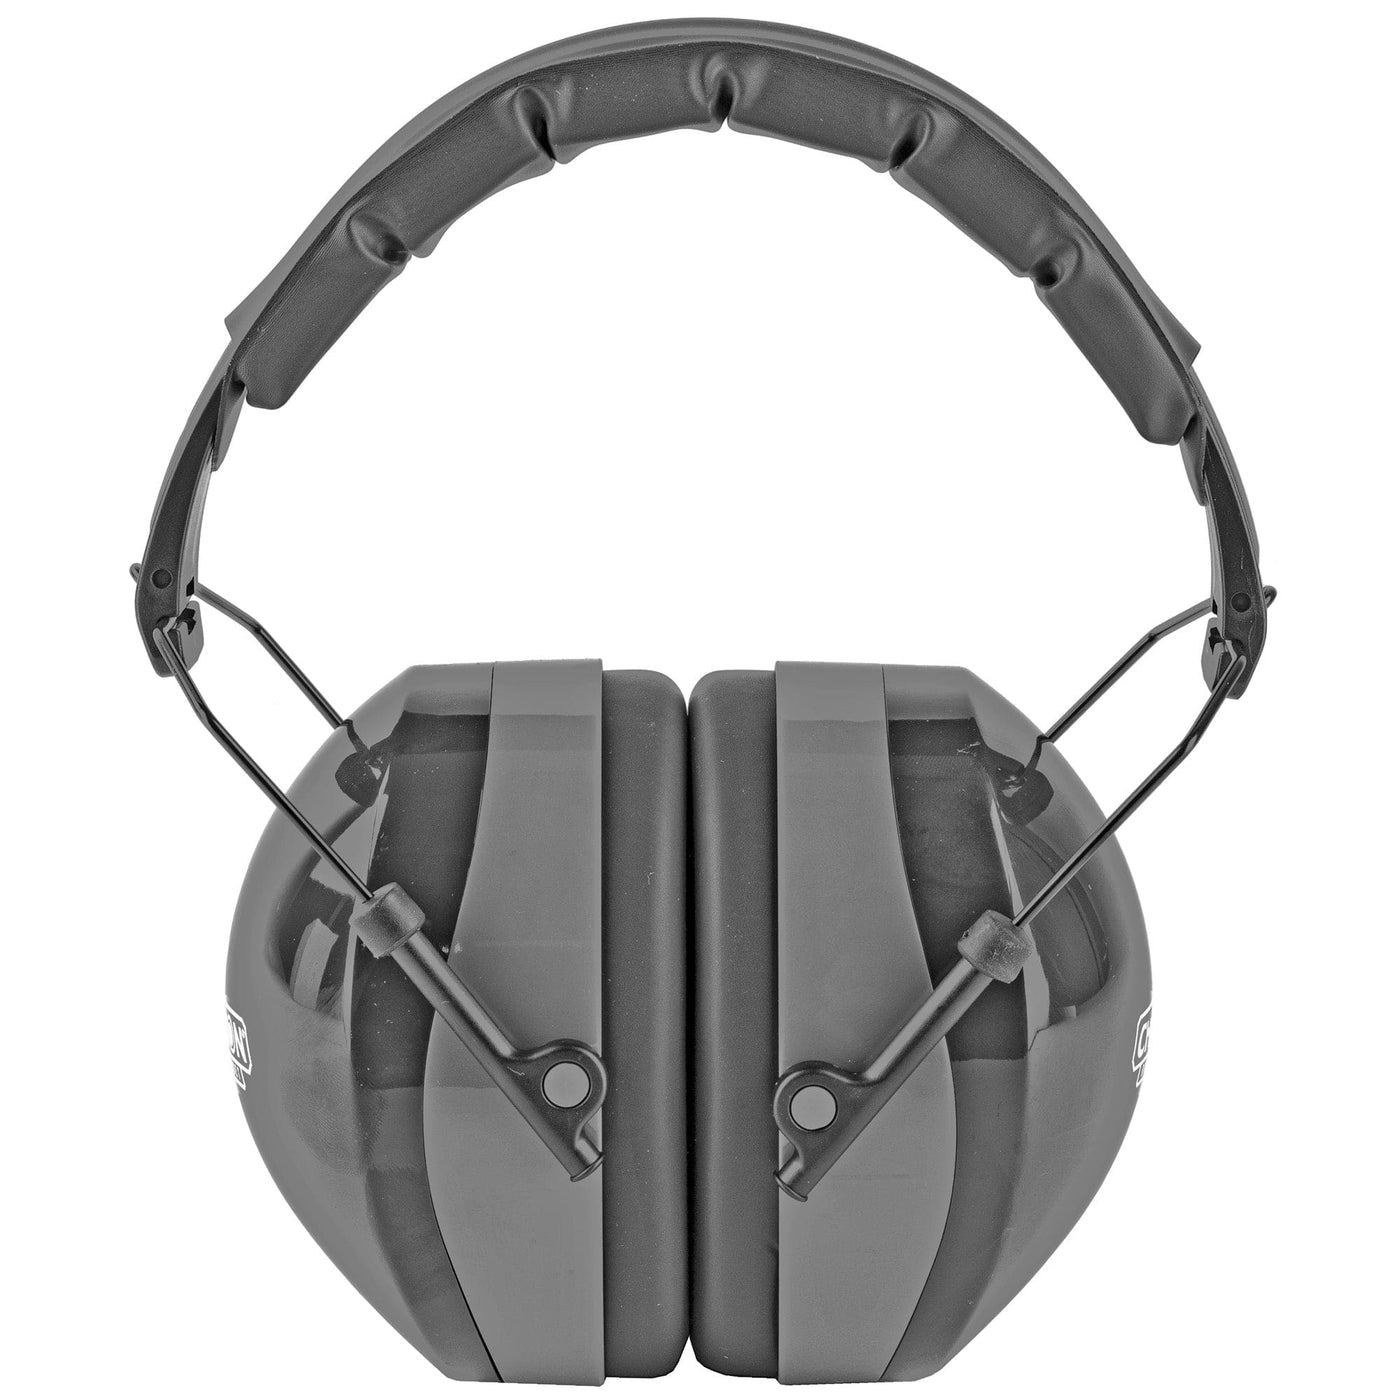 Champion Traps & Targets Champion Hdphn Ear Muffs Passive Safety/Protection